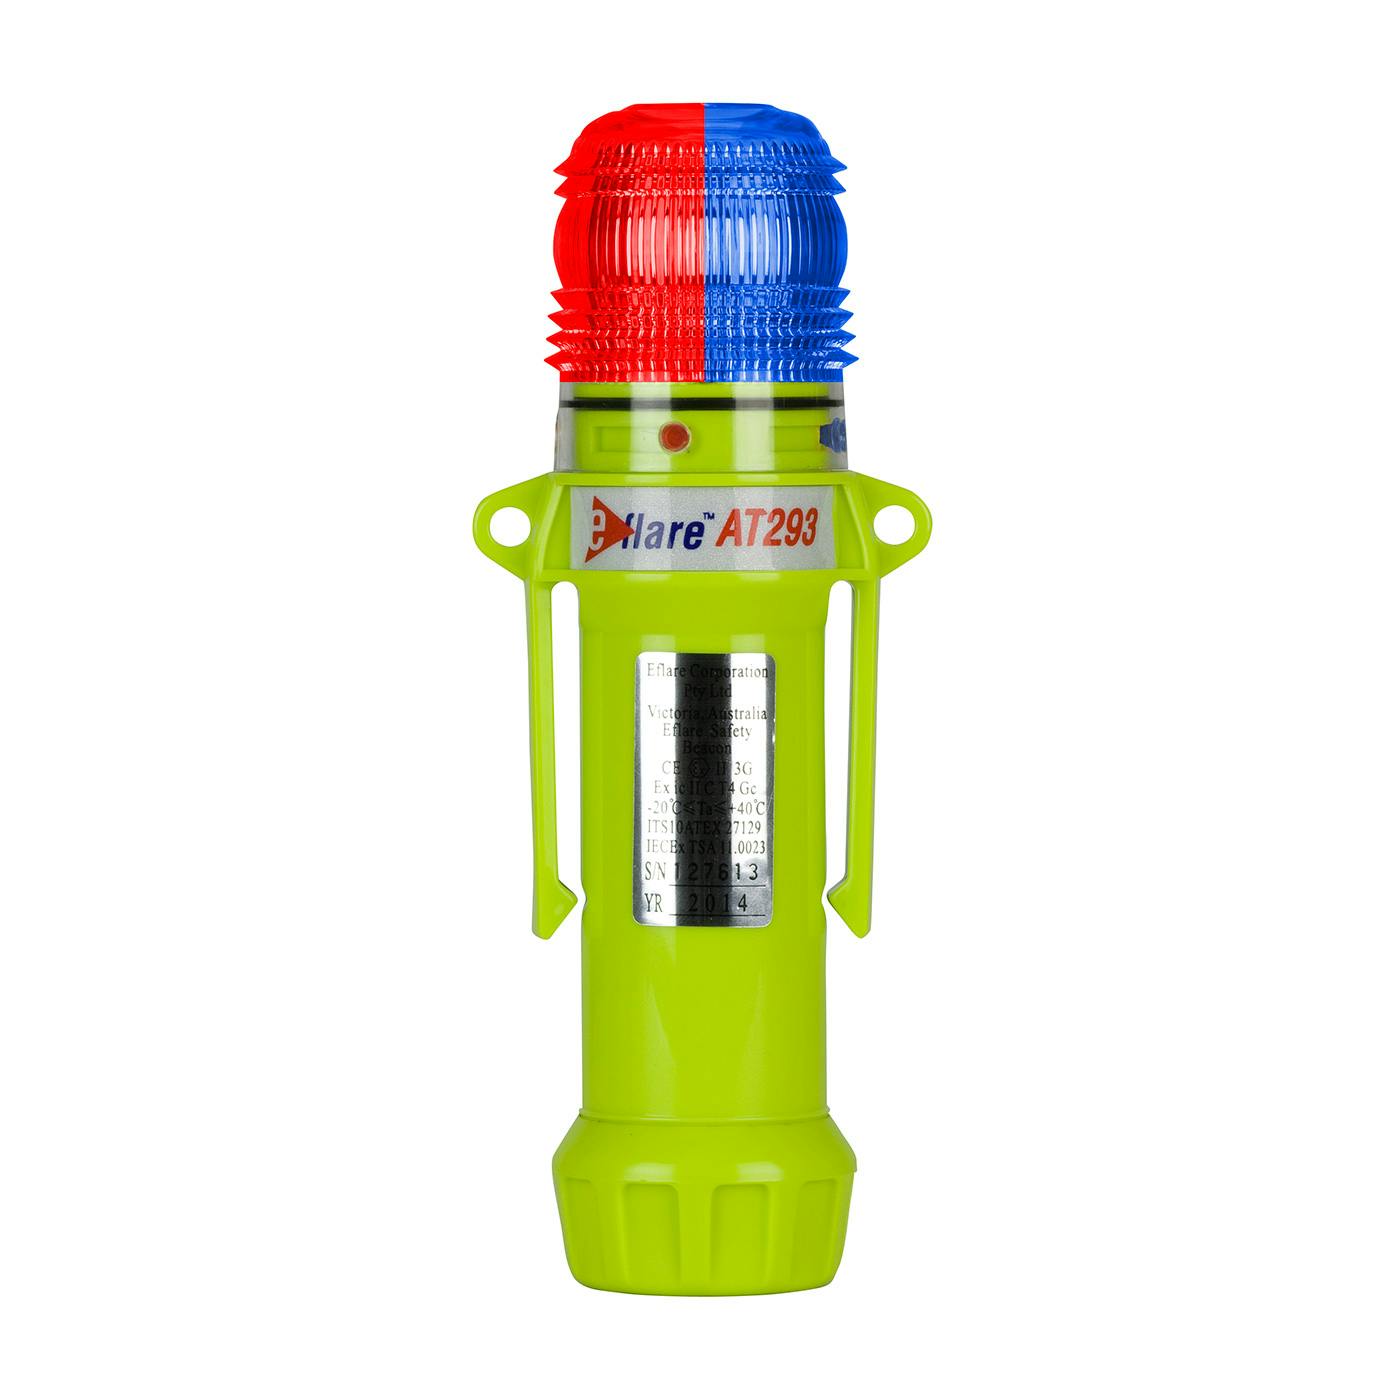 8" Safety & Emergency Beacon - Alternating Red/Blue, Red (939-AT293-R/B) - 8_0